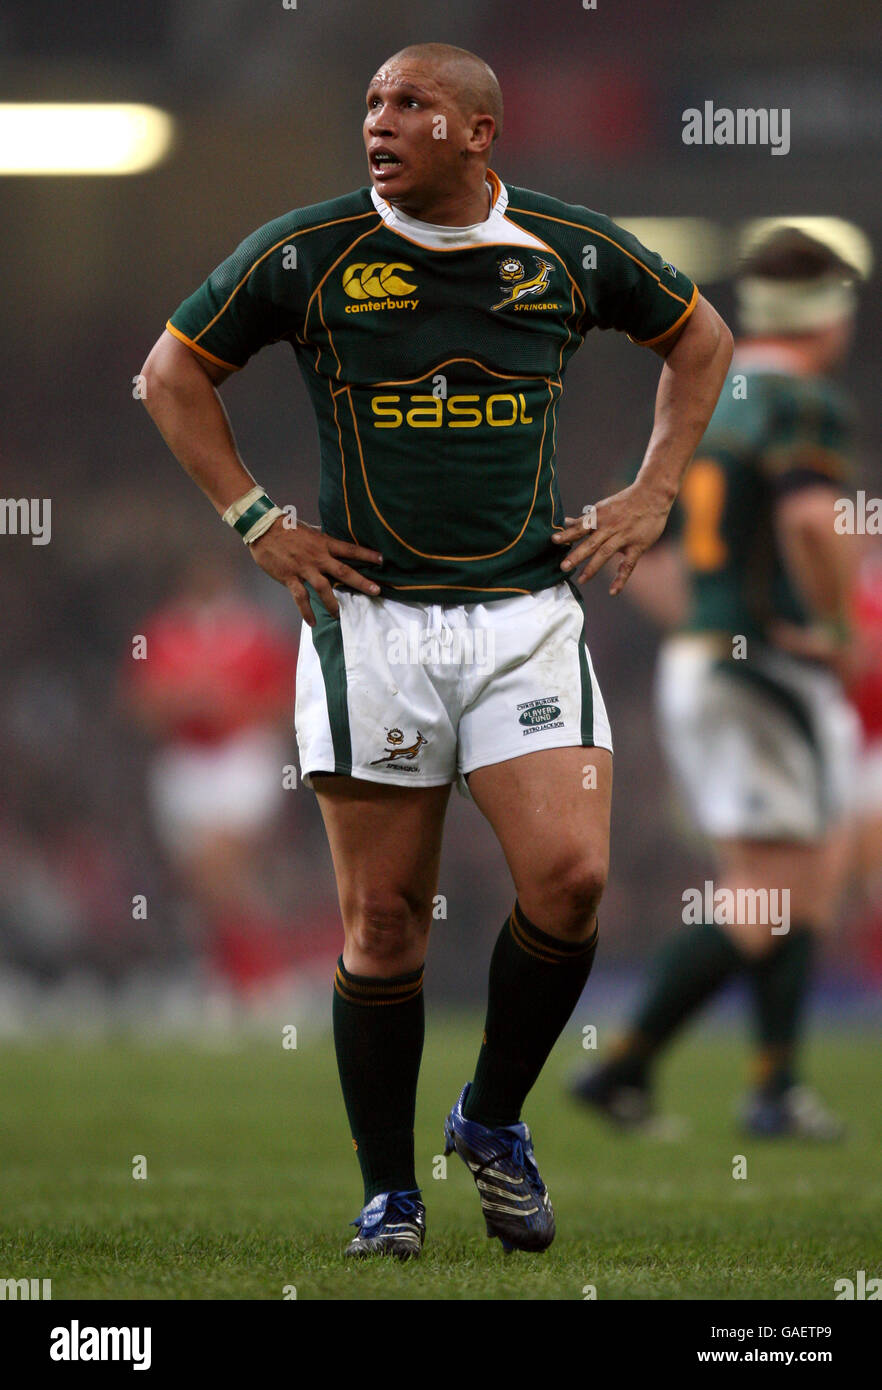 Rugby Union - Prince William Cup - Wales v South Africa - Millennium Stadium. Enrico Januarie, South Africa Stock Photo